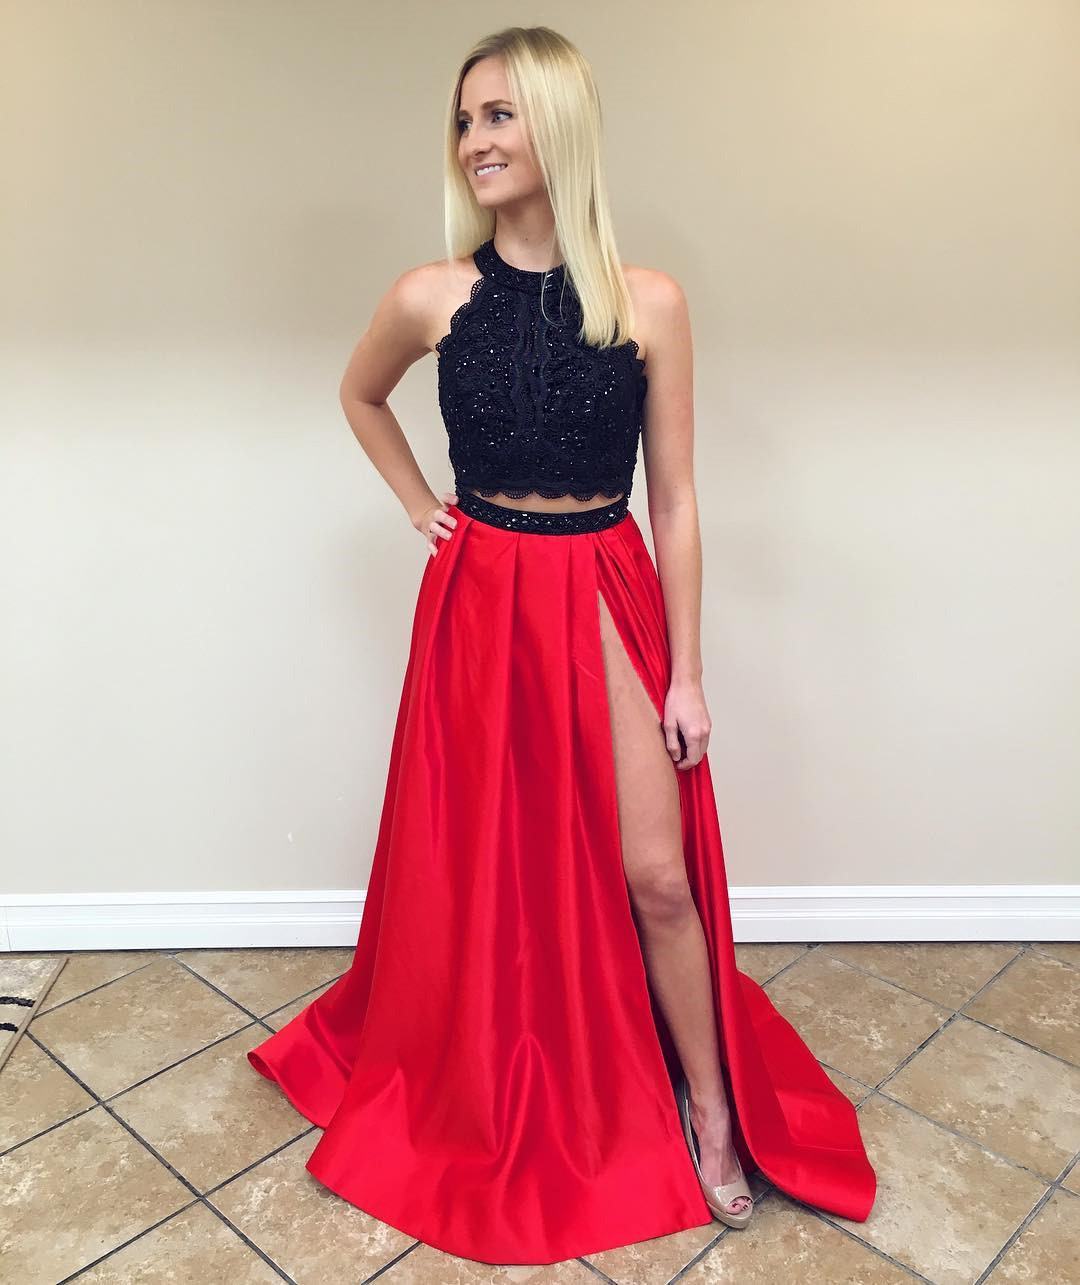 Black Lace Crop To Red Satin Two Piece Prom Dresses 2017 Sexy Split Party Gowns